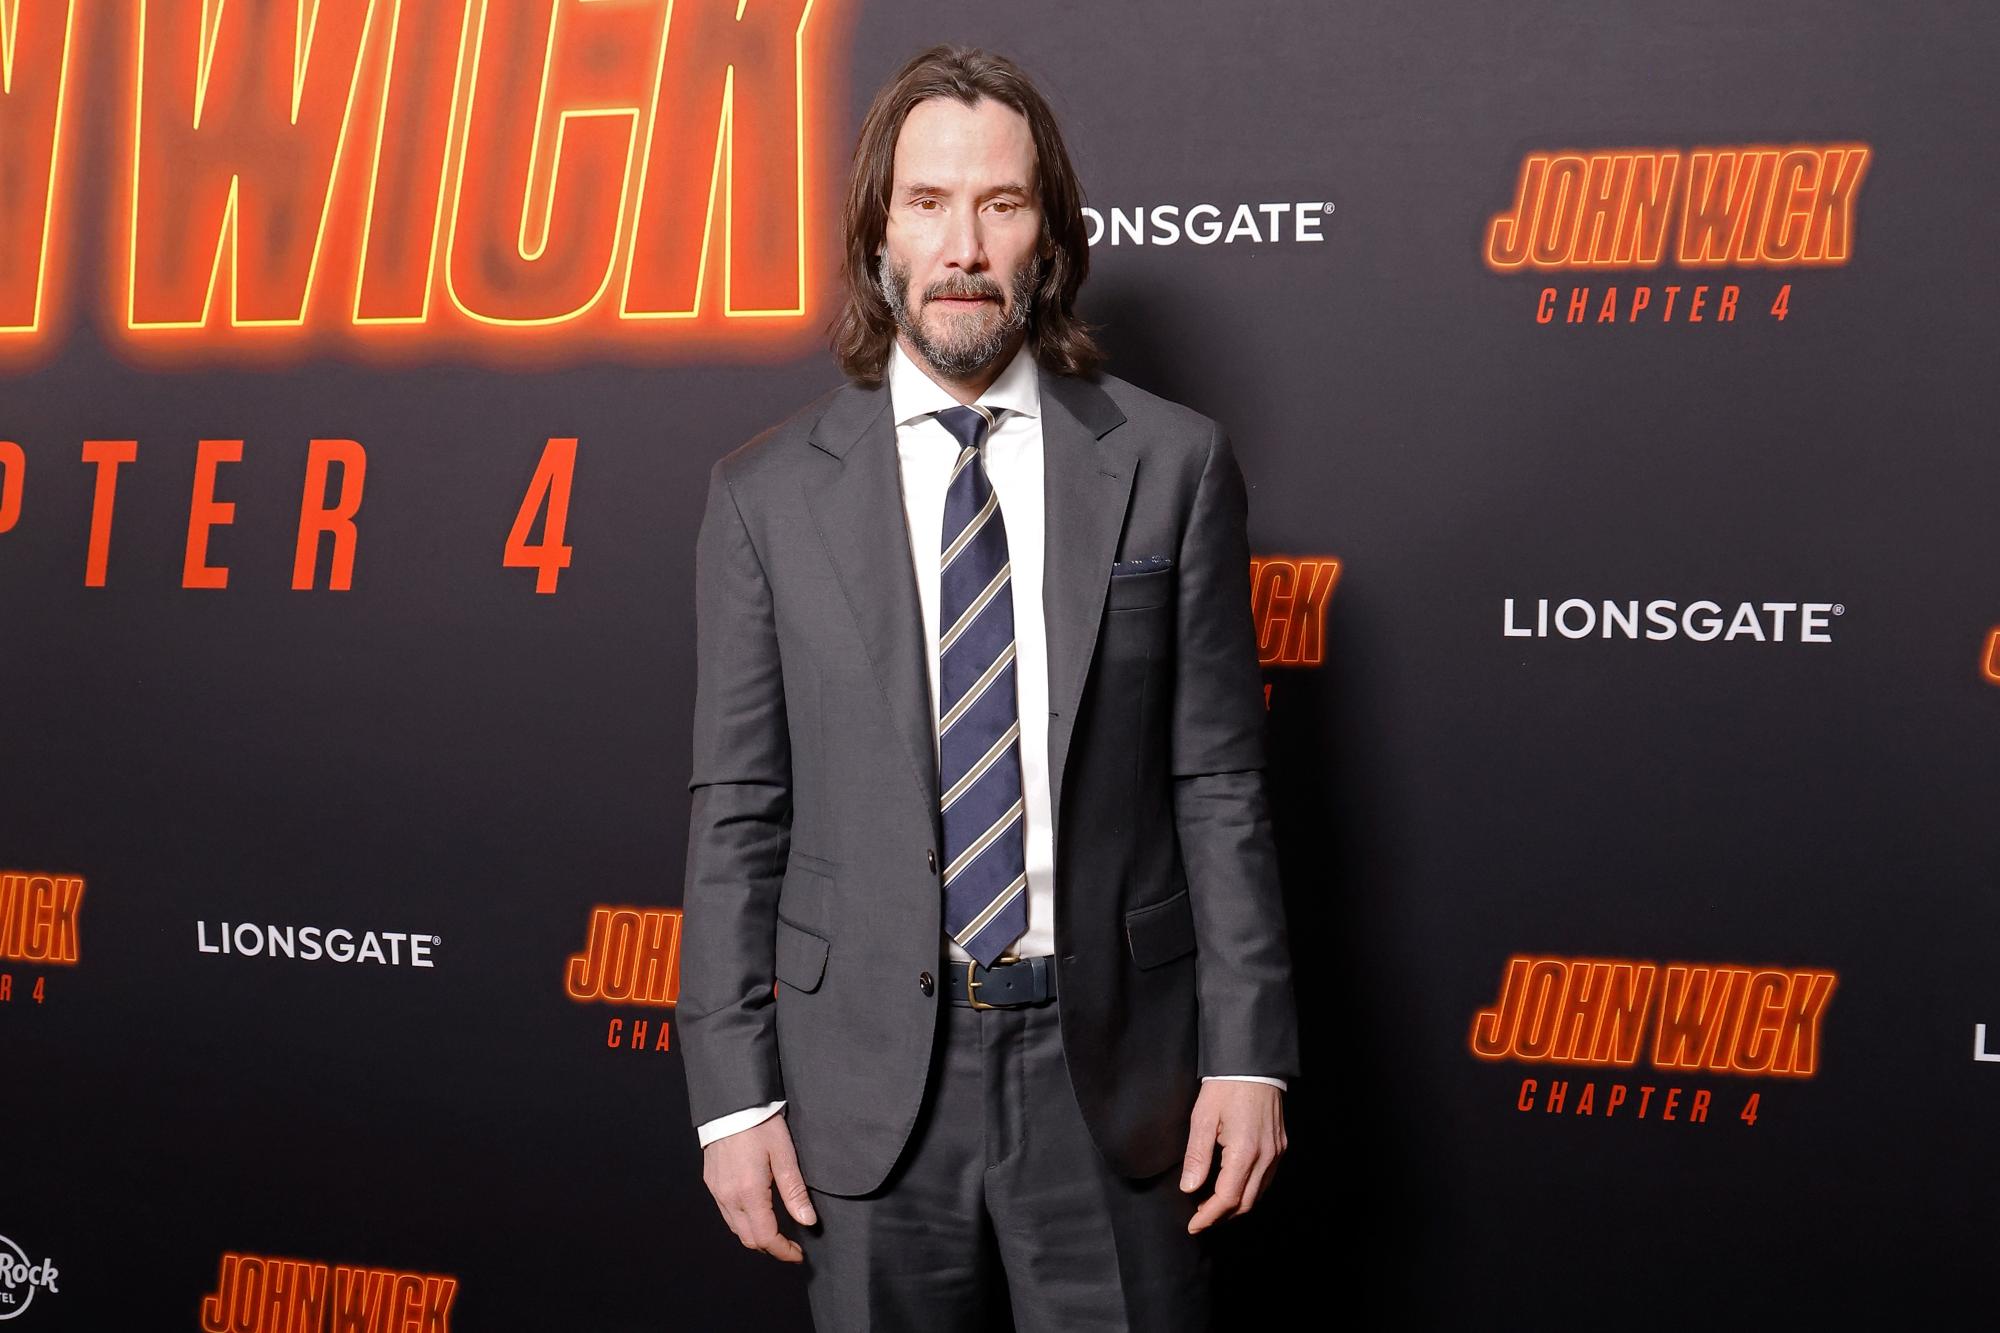 'John Wick: Chapter 4' star Keanu Reeves, who kept props. He's wearing a suit and tie in front of a step and repeat.